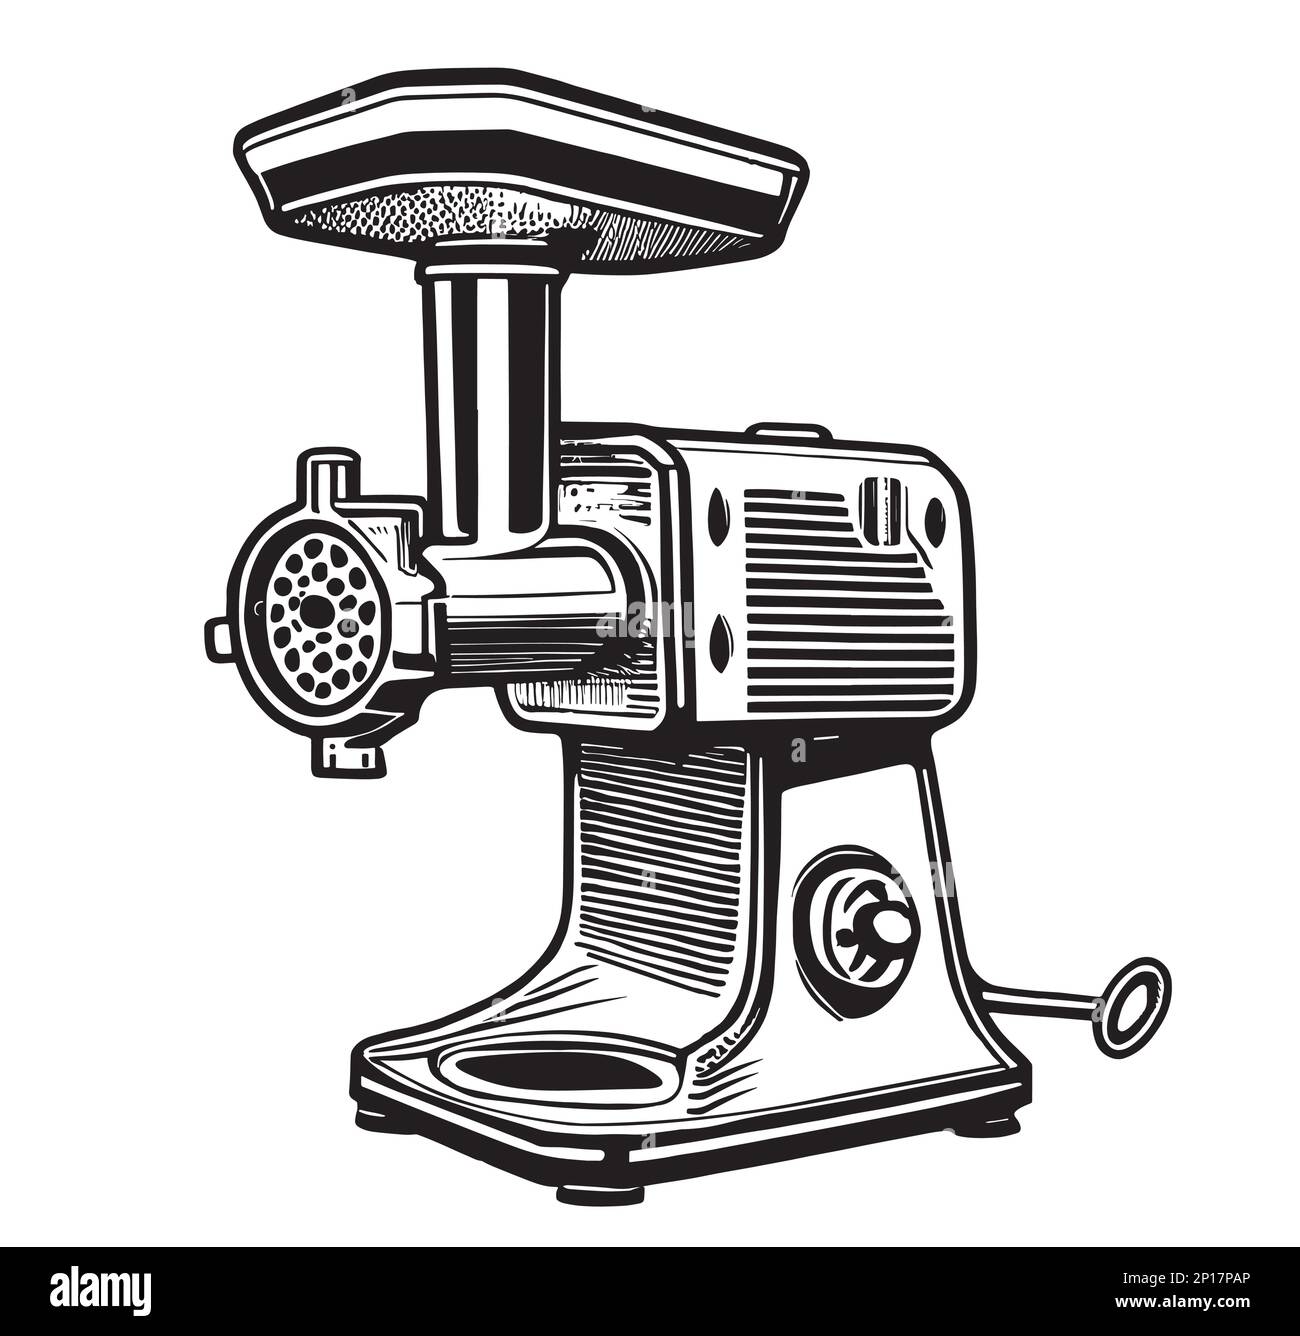 Meat grinder retro sketch drawn with a hand in a dudl style vector illustration devices Stock Vector